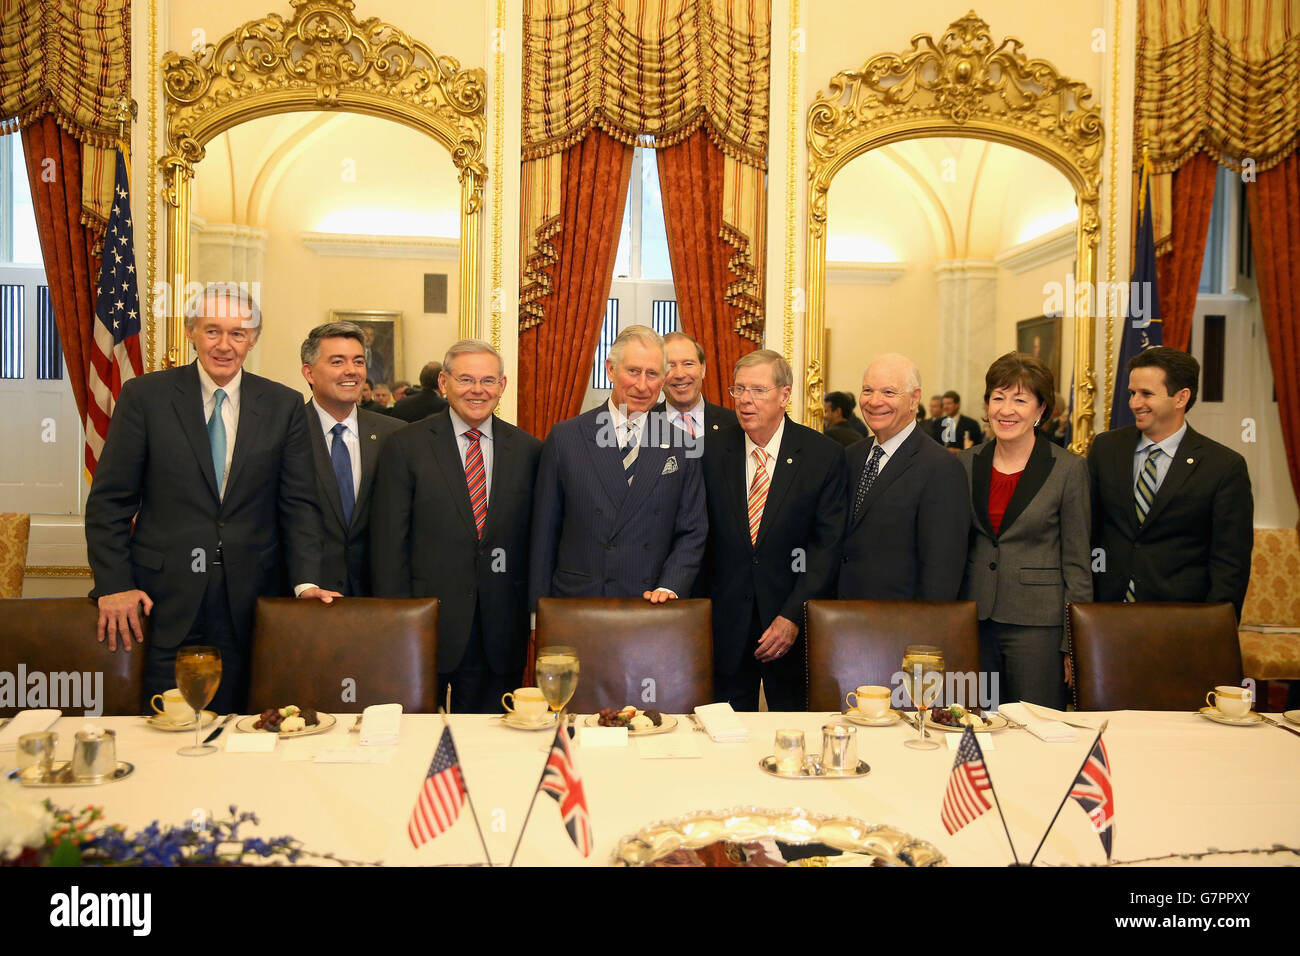 The Prince of Wales Senators (left to right) Ed Markey, Cory Gardner, Bob Menendez, Tom Udall, John Isakson, Ben Cordin, Susan Collins and Brian Schatz in the Capitol Building as part of his trip to Washington DC, USA. Stock Photo